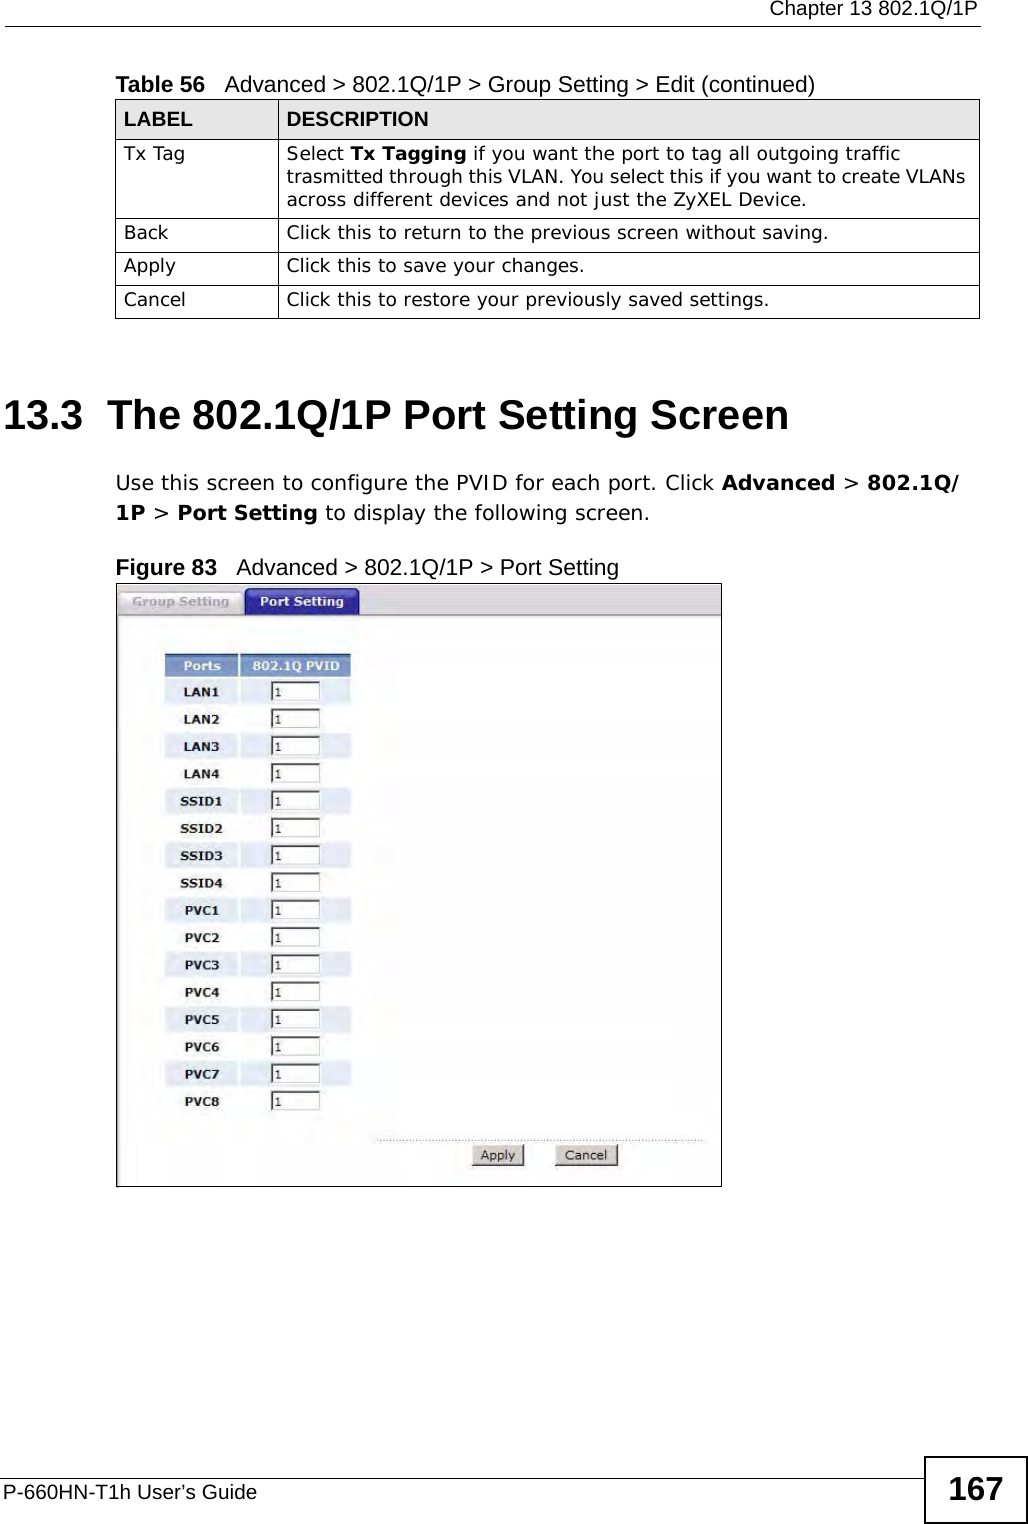  Chapter 13 802.1Q/1PP-660HN-T1h User’s Guide 16713.3  The 802.1Q/1P Port Setting ScreenUse this screen to configure the PVID for each port. Click Advanced &gt; 802.1Q/1P &gt; Port Setting to display the following screen.Figure 83   Advanced &gt; 802.1Q/1P &gt; Port SettingTx Tag Select Tx Tagging if you want the port to tag all outgoing traffic trasmitted through this VLAN. You select this if you want to create VLANs across different devices and not just the ZyXEL Device.Back Click this to return to the previous screen without saving.Apply Click this to save your changes.Cancel Click this to restore your previously saved settings.Table 56   Advanced &gt; 802.1Q/1P &gt; Group Setting &gt; Edit (continued)LABEL DESCRIPTION